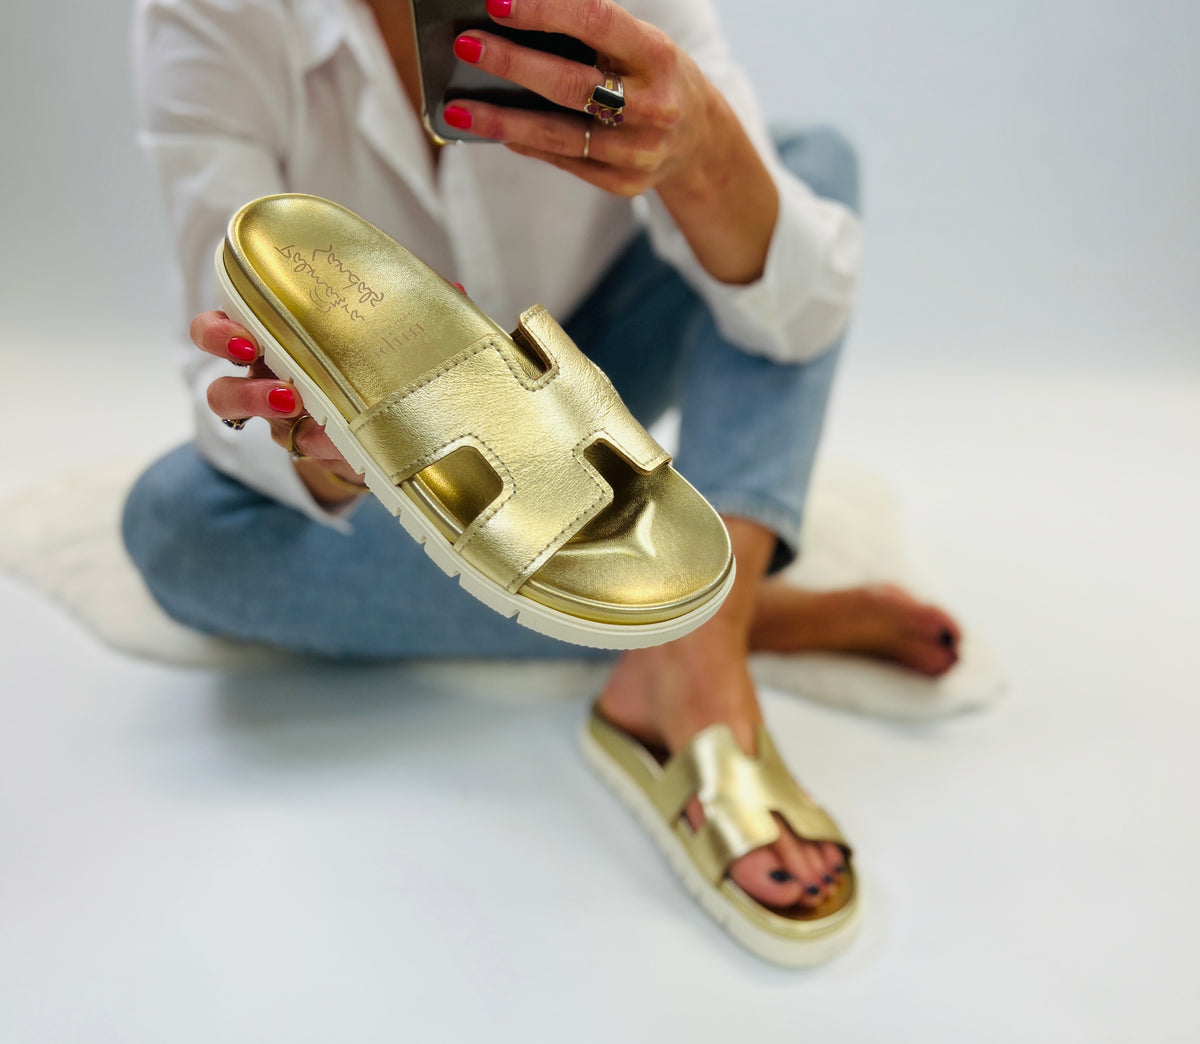 Slip on, gold leather sliders with an ergonomic gold innersole